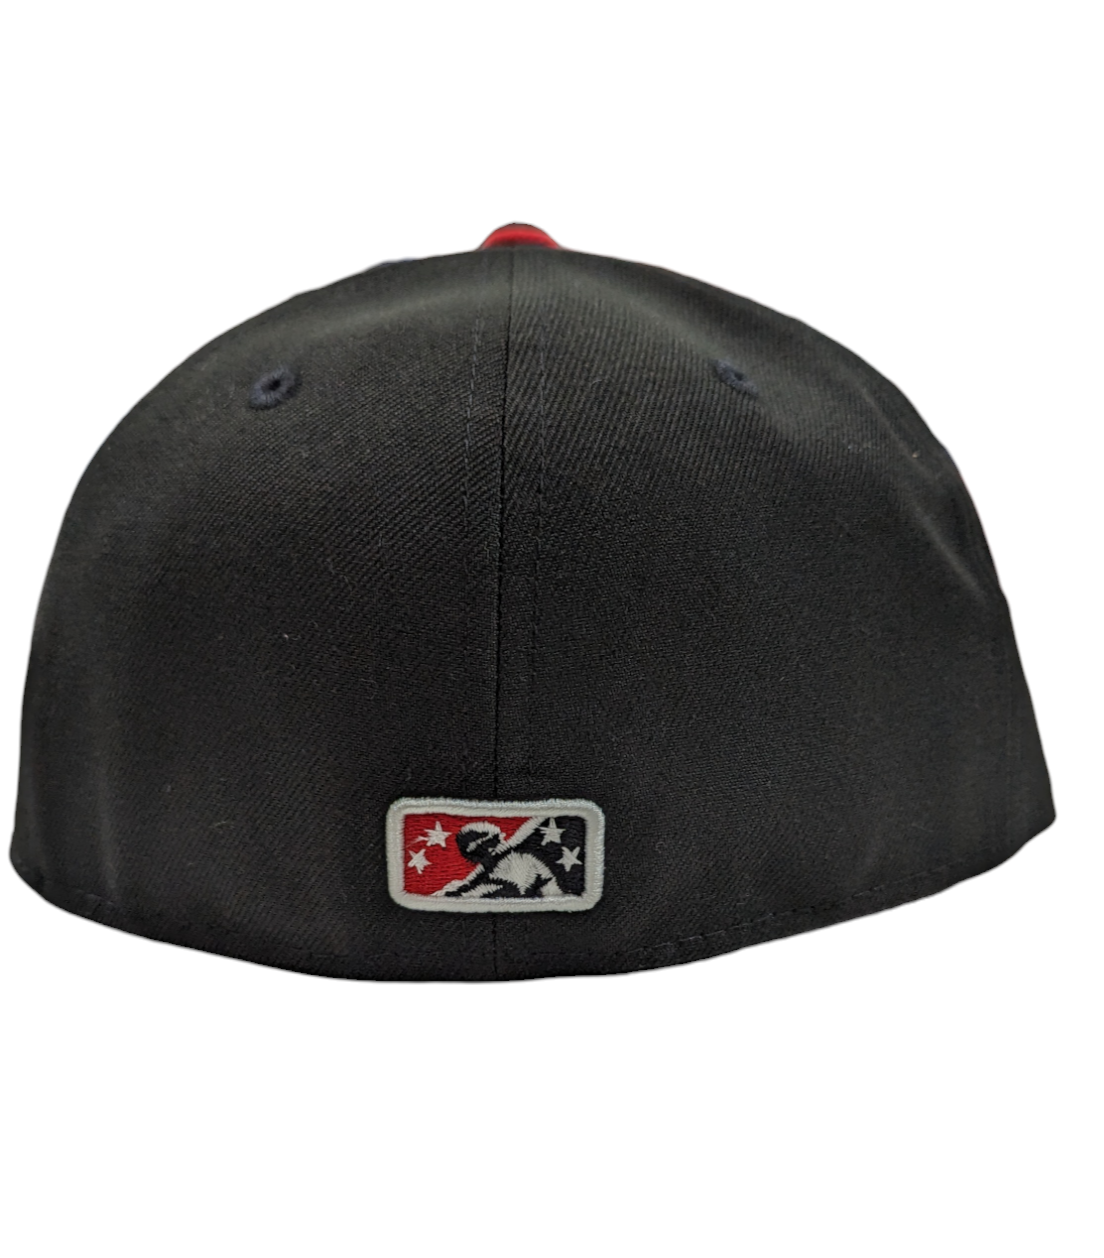 Mudville 9 MILB 2 Tone Black/Red Centerfield New Era 59FIFTY Fitted Hat